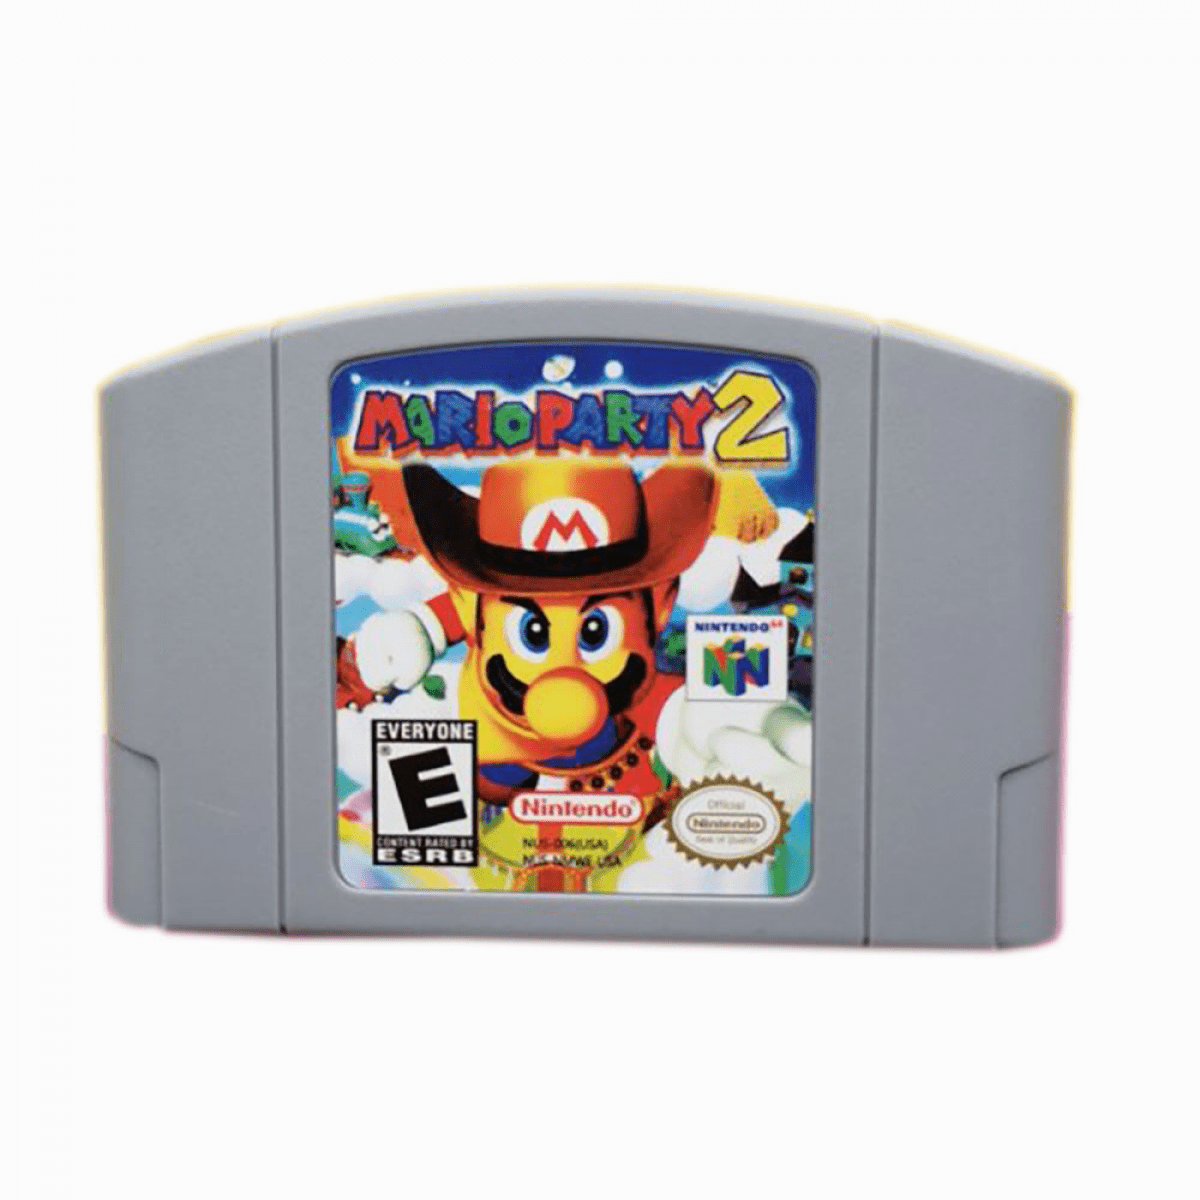 N64 Game Mario Party 2 Games Cartridge Card for 64 N64 Console US ...